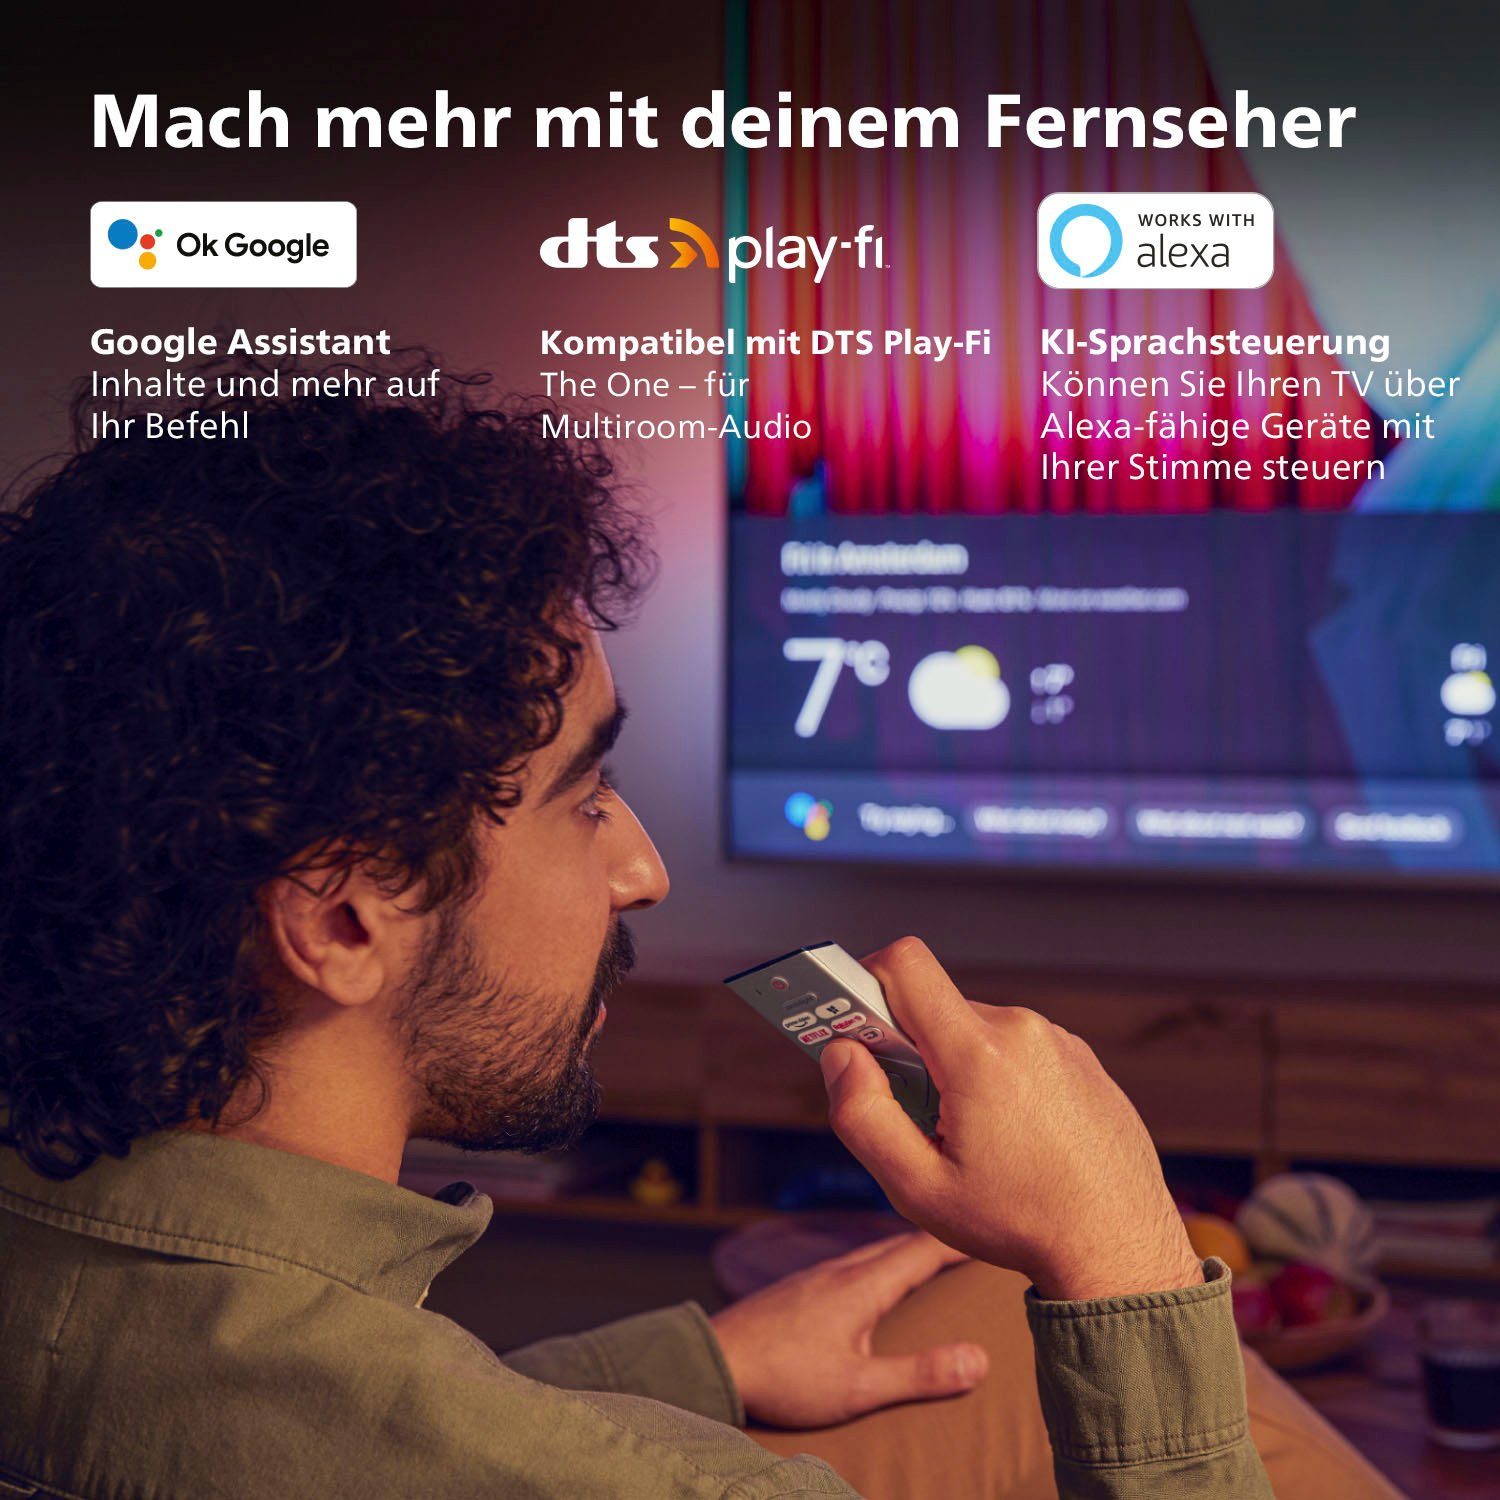 Philips 65PUS8507/12 LED-Fernseher (164 Android cm/65 Zoll, Smart-TV) TV, 4K HD, Ultra